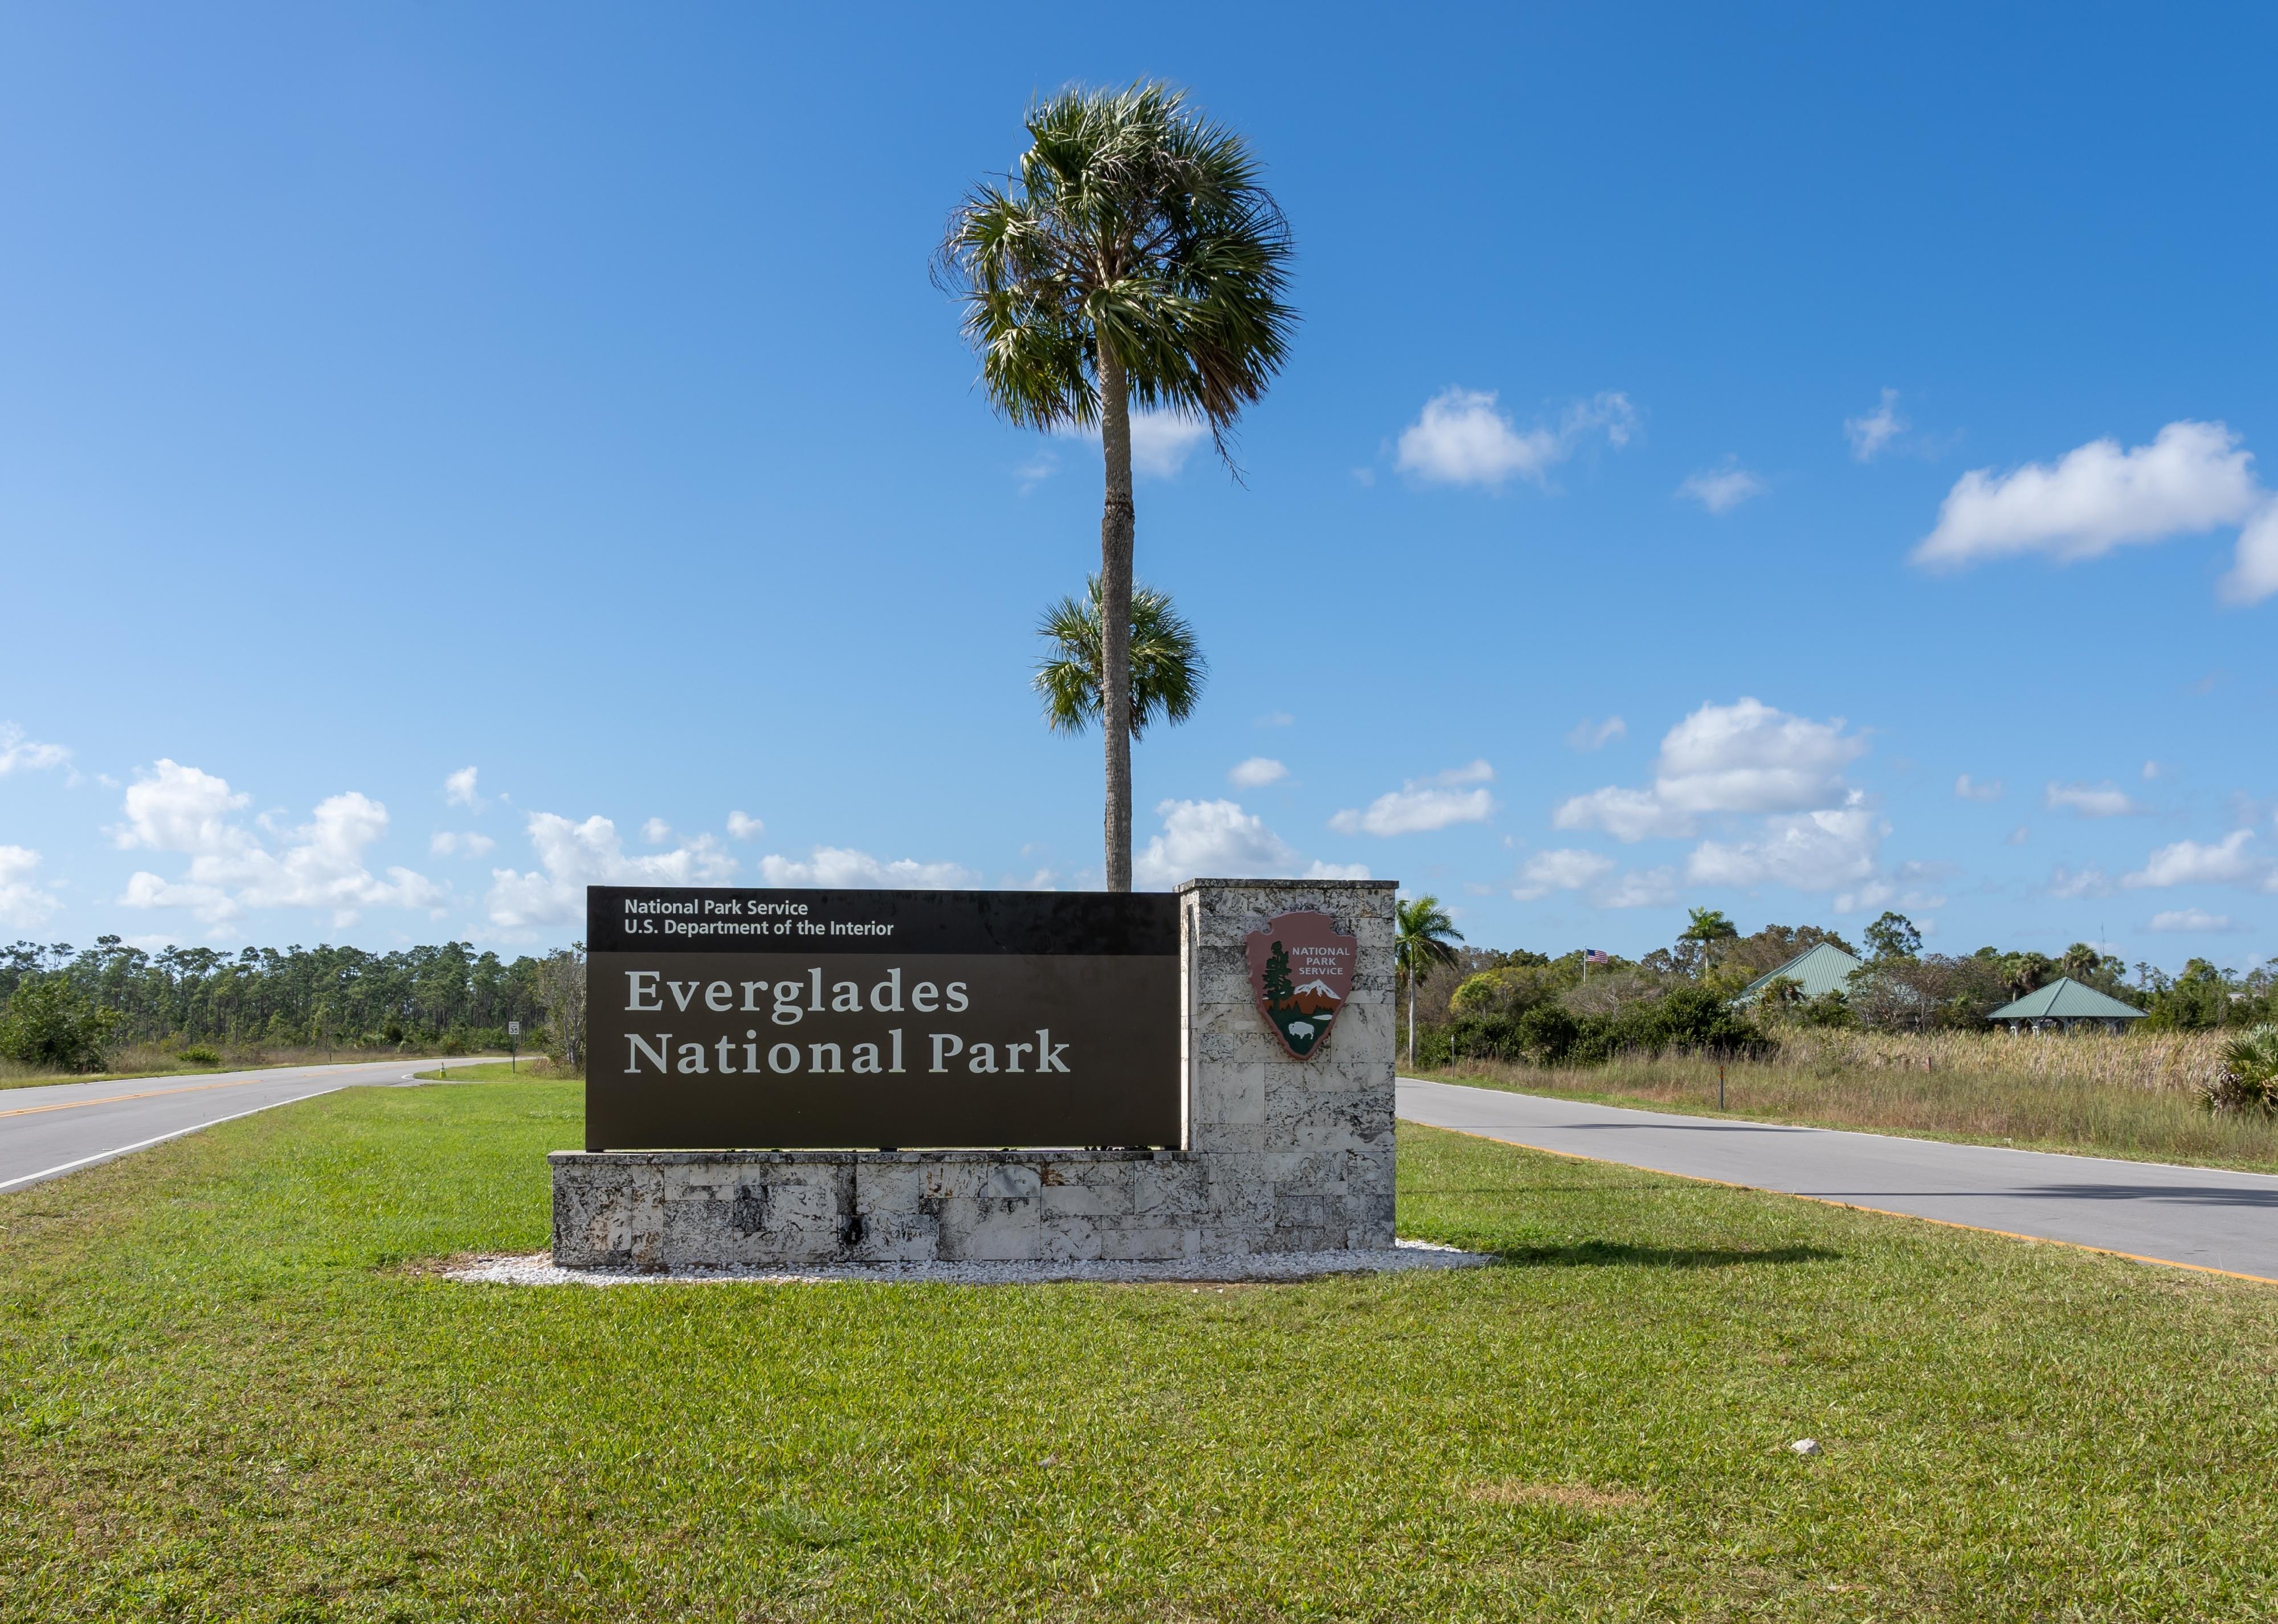 Everglades National Park sign is shown in Florida.